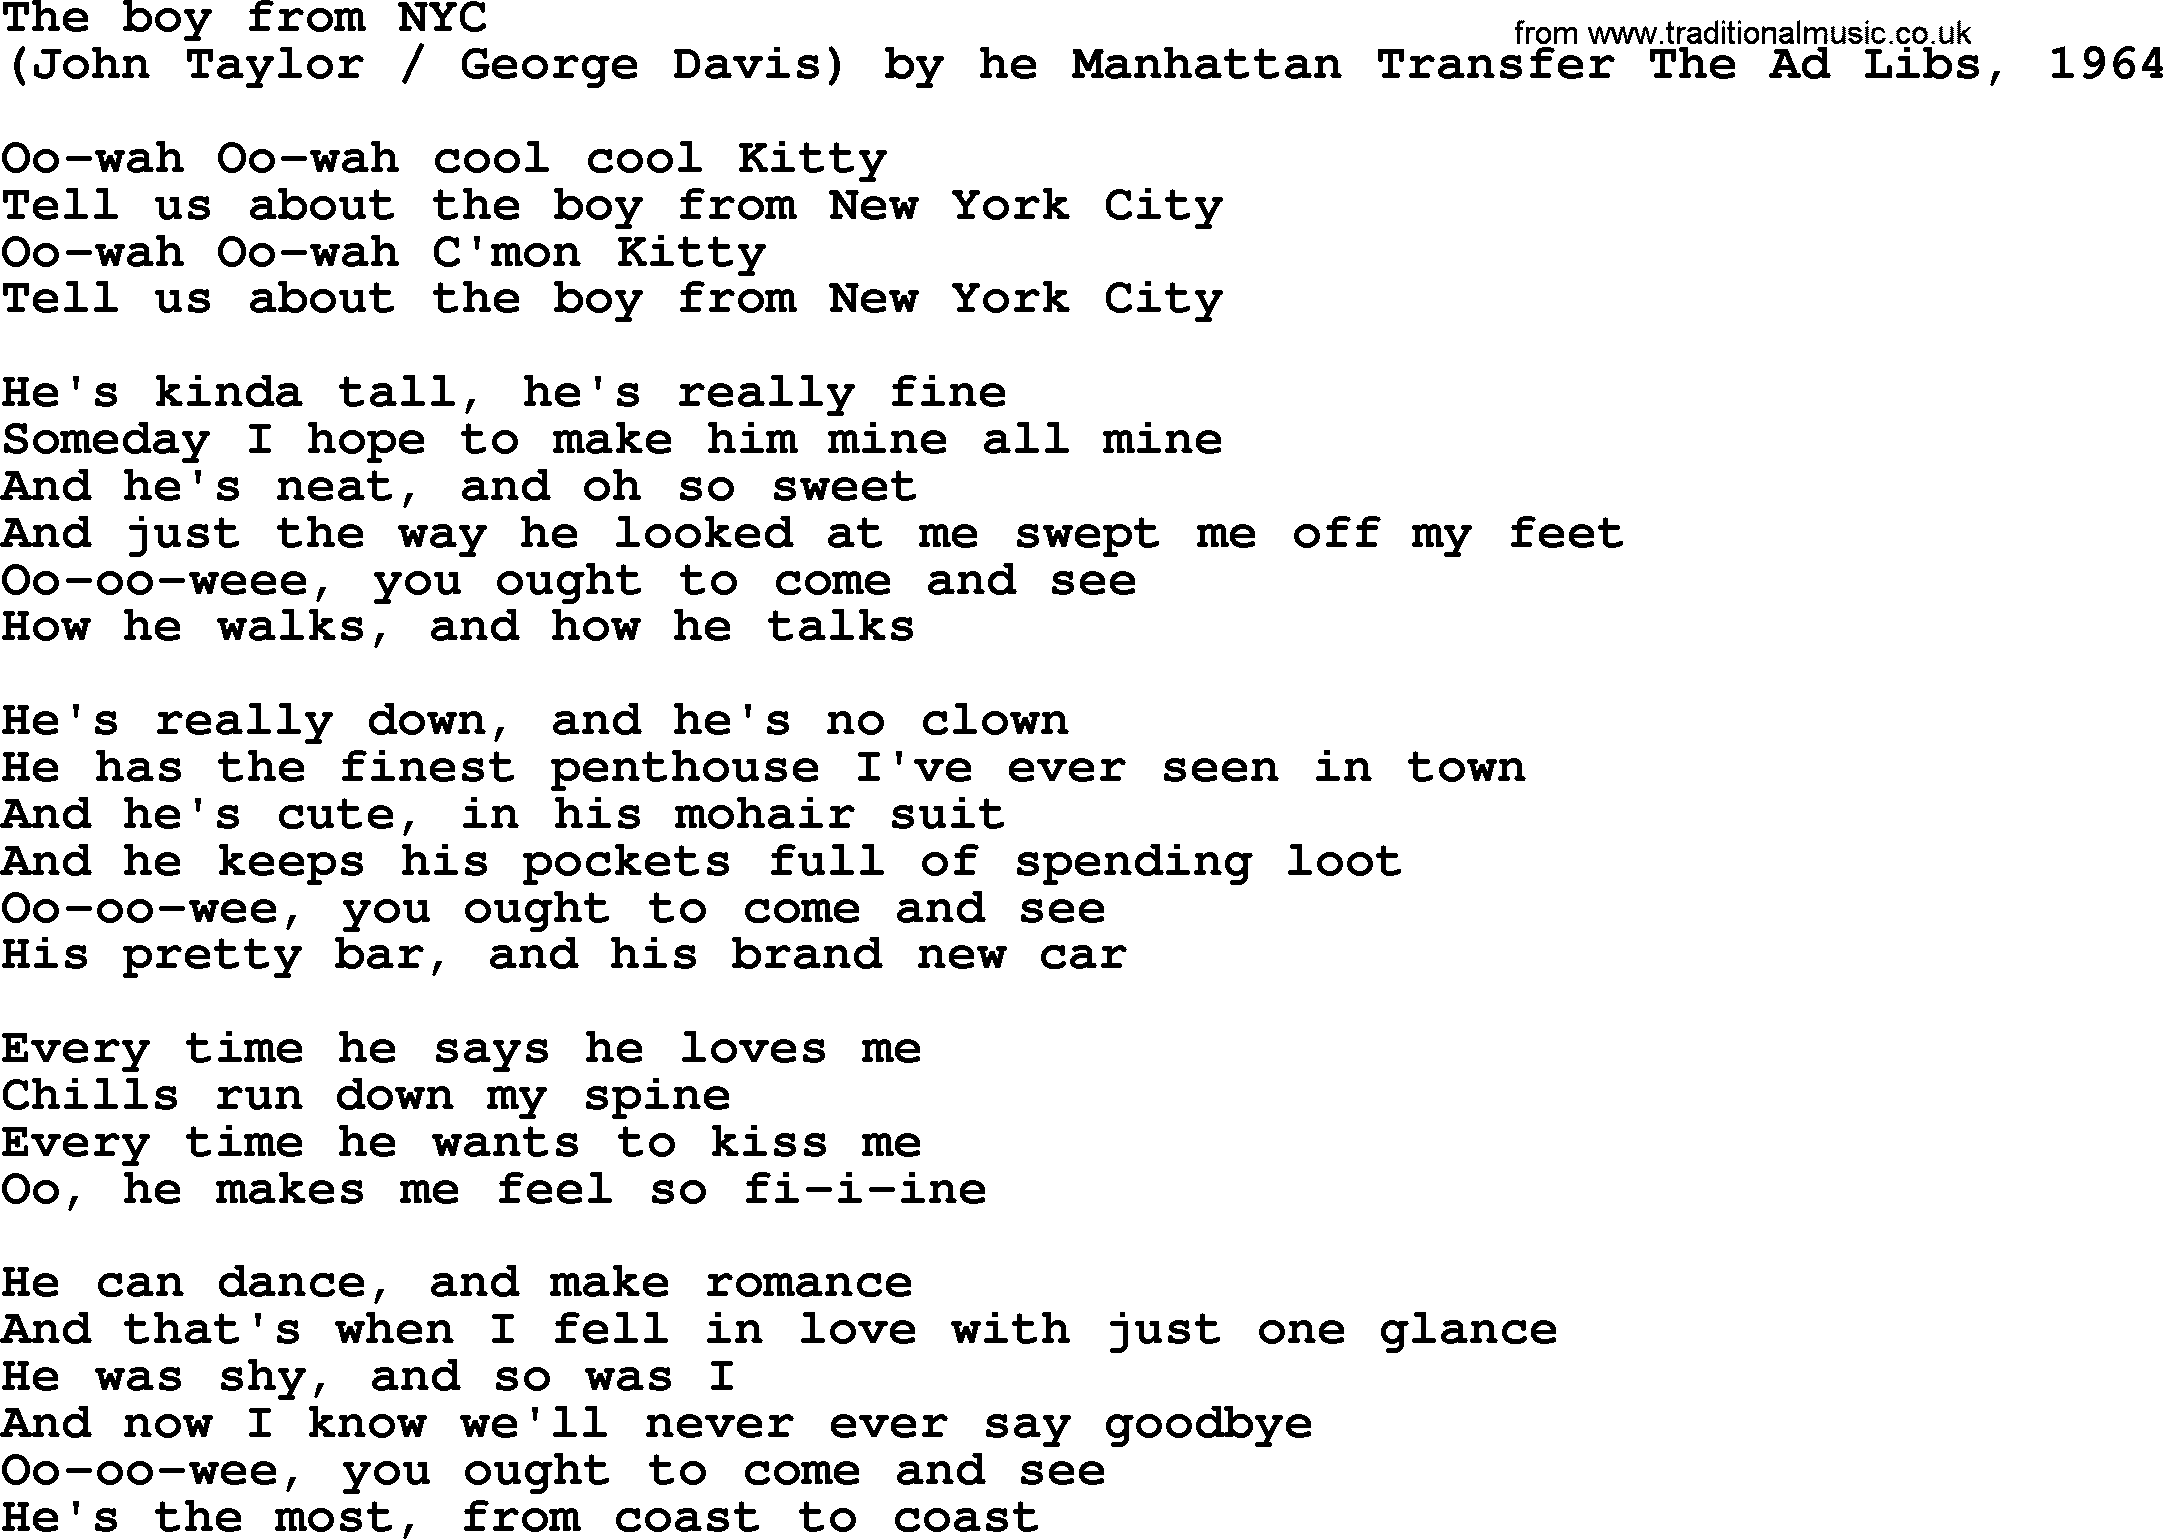 Bruce Springsteen song: The Boy From Nyc lyrics